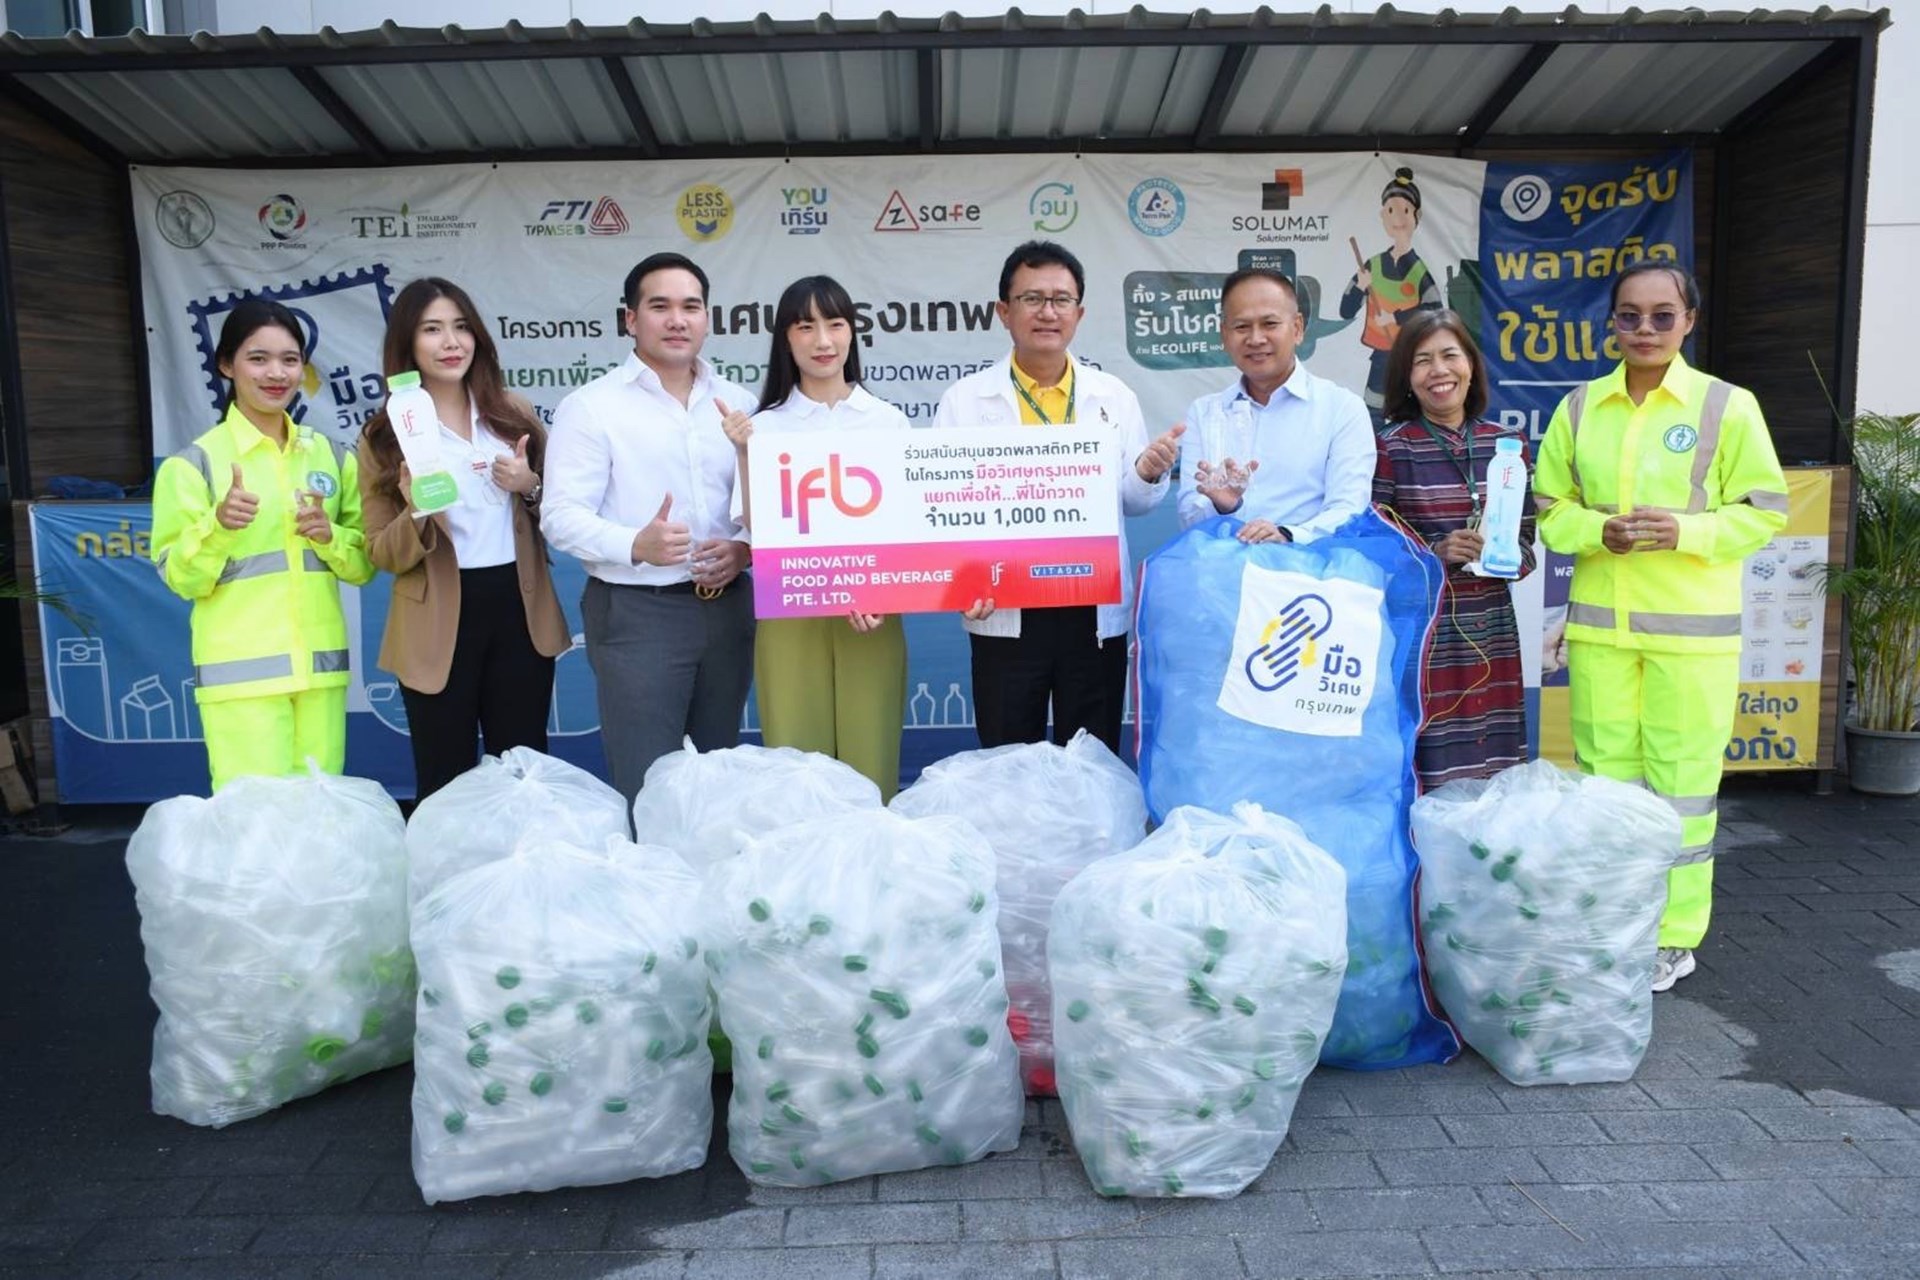 INNOVATIVE FOOD AND BEVERAGE (THAILAND) CO., LTD. donated 1,000 kilograms of plastic bottles to the Department of Environment to recycle into safety clothing for street cleaning workers throughout Bangkok